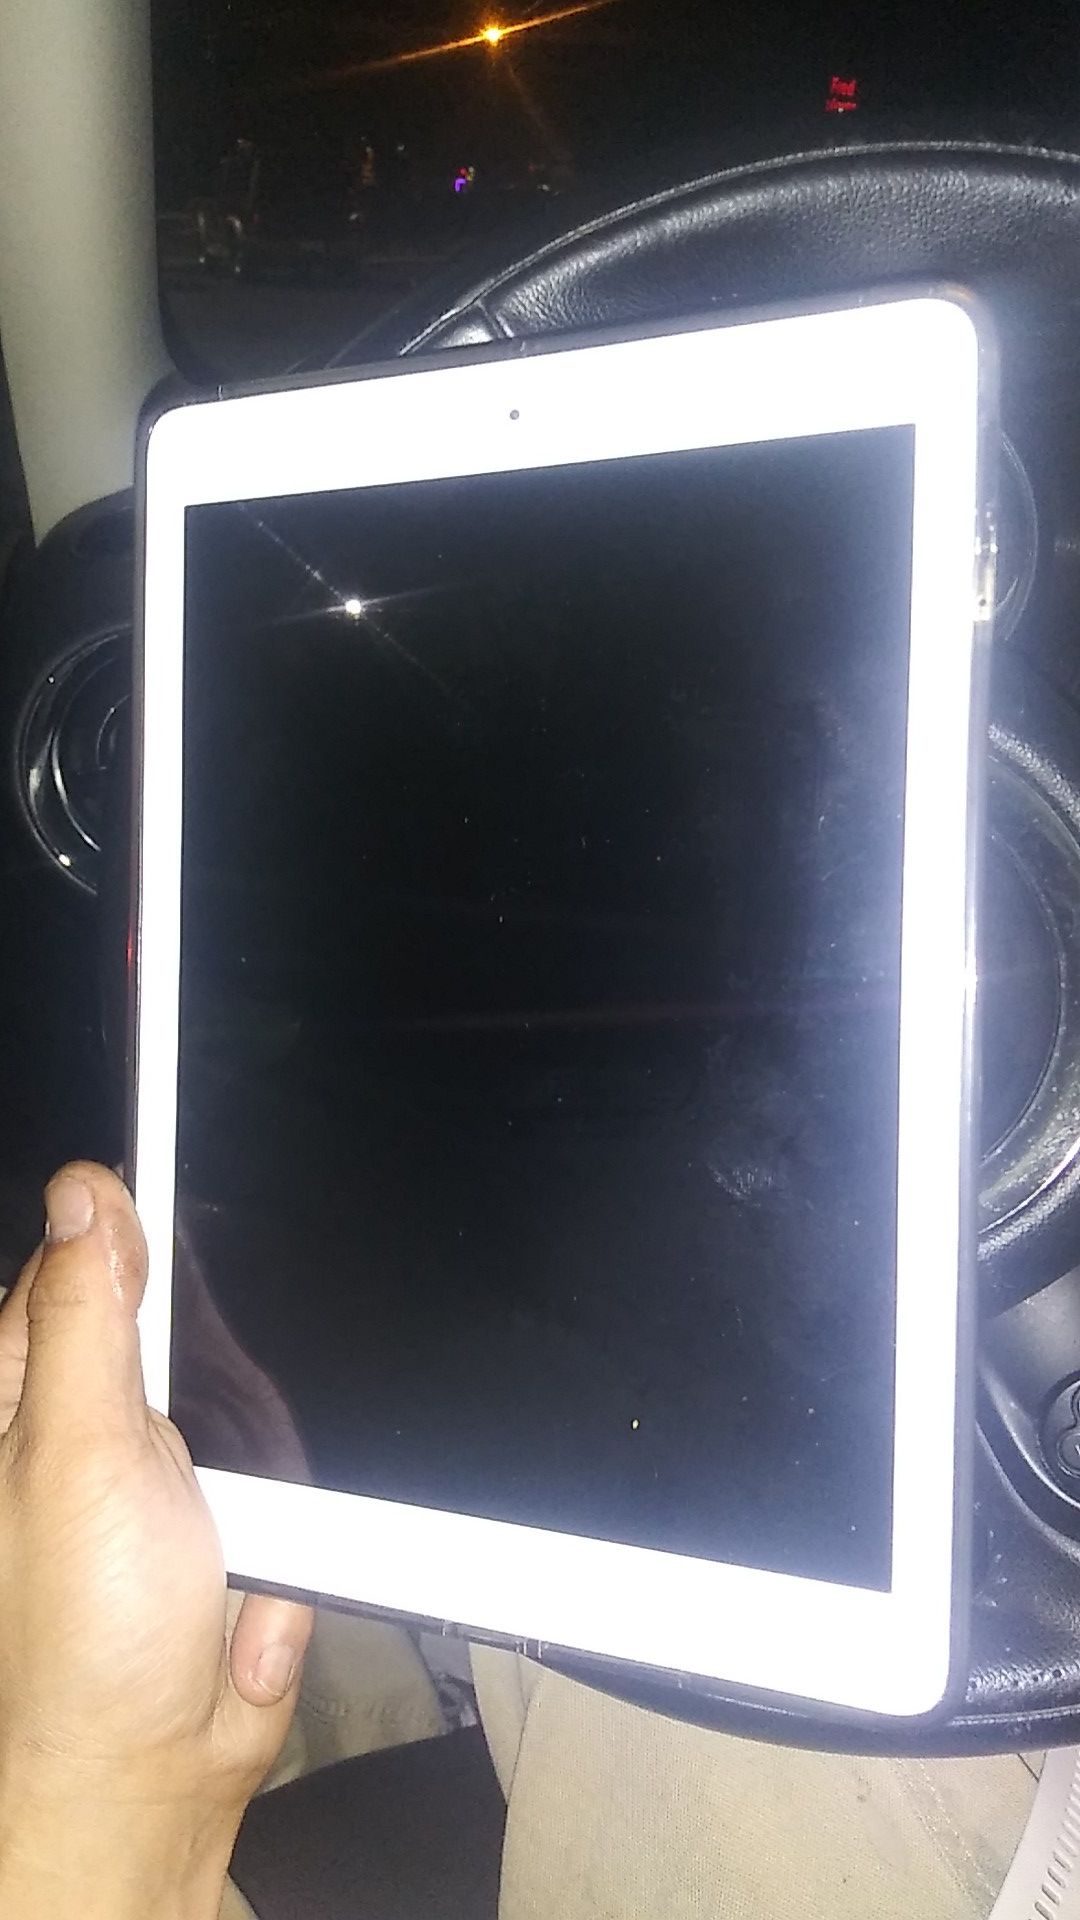 Excellent condition user pin screen lock IPAD model A1475